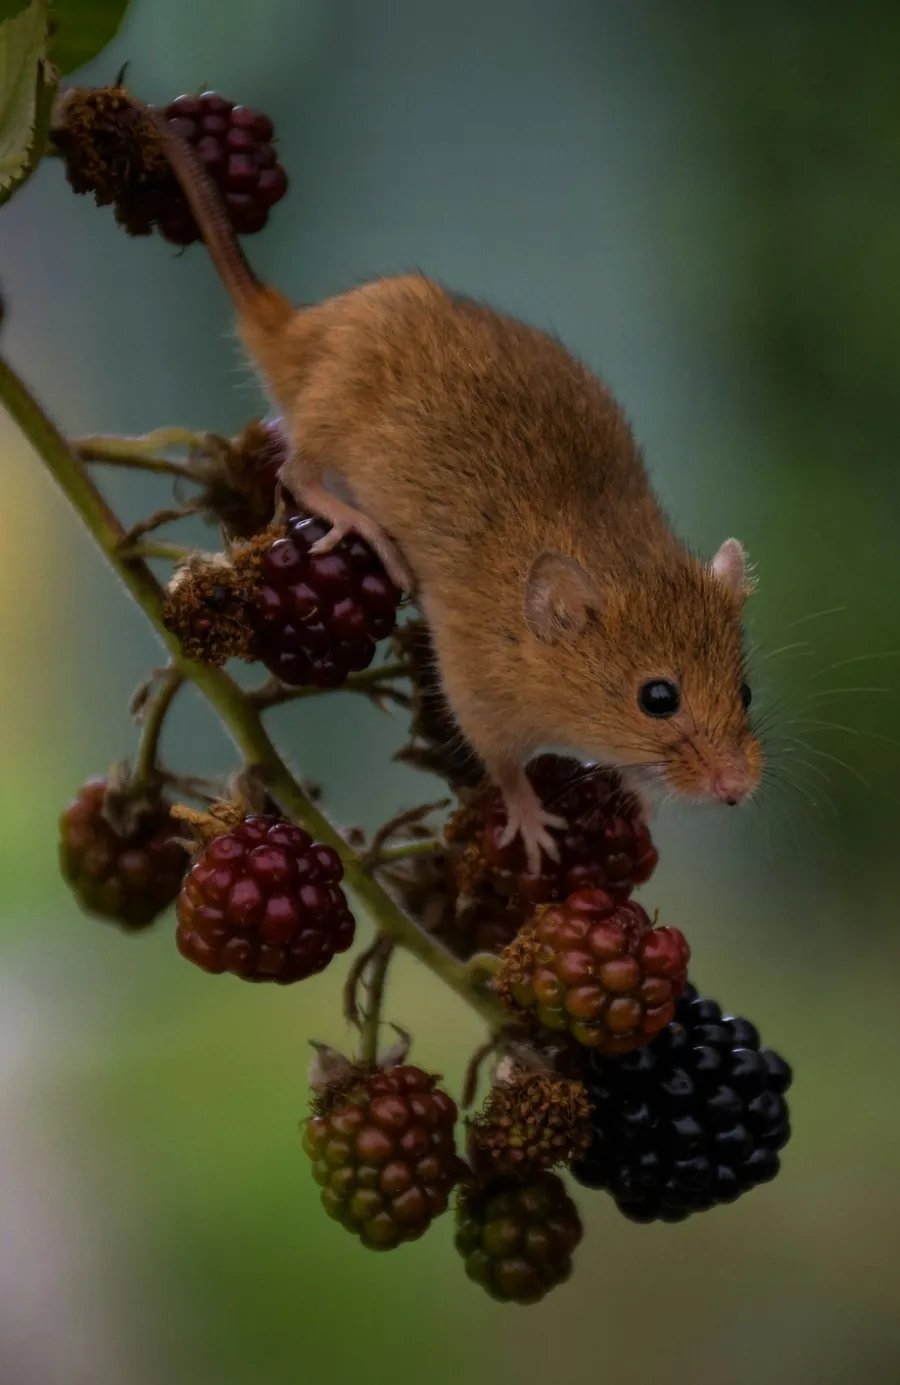 a rodent on a branch with berries